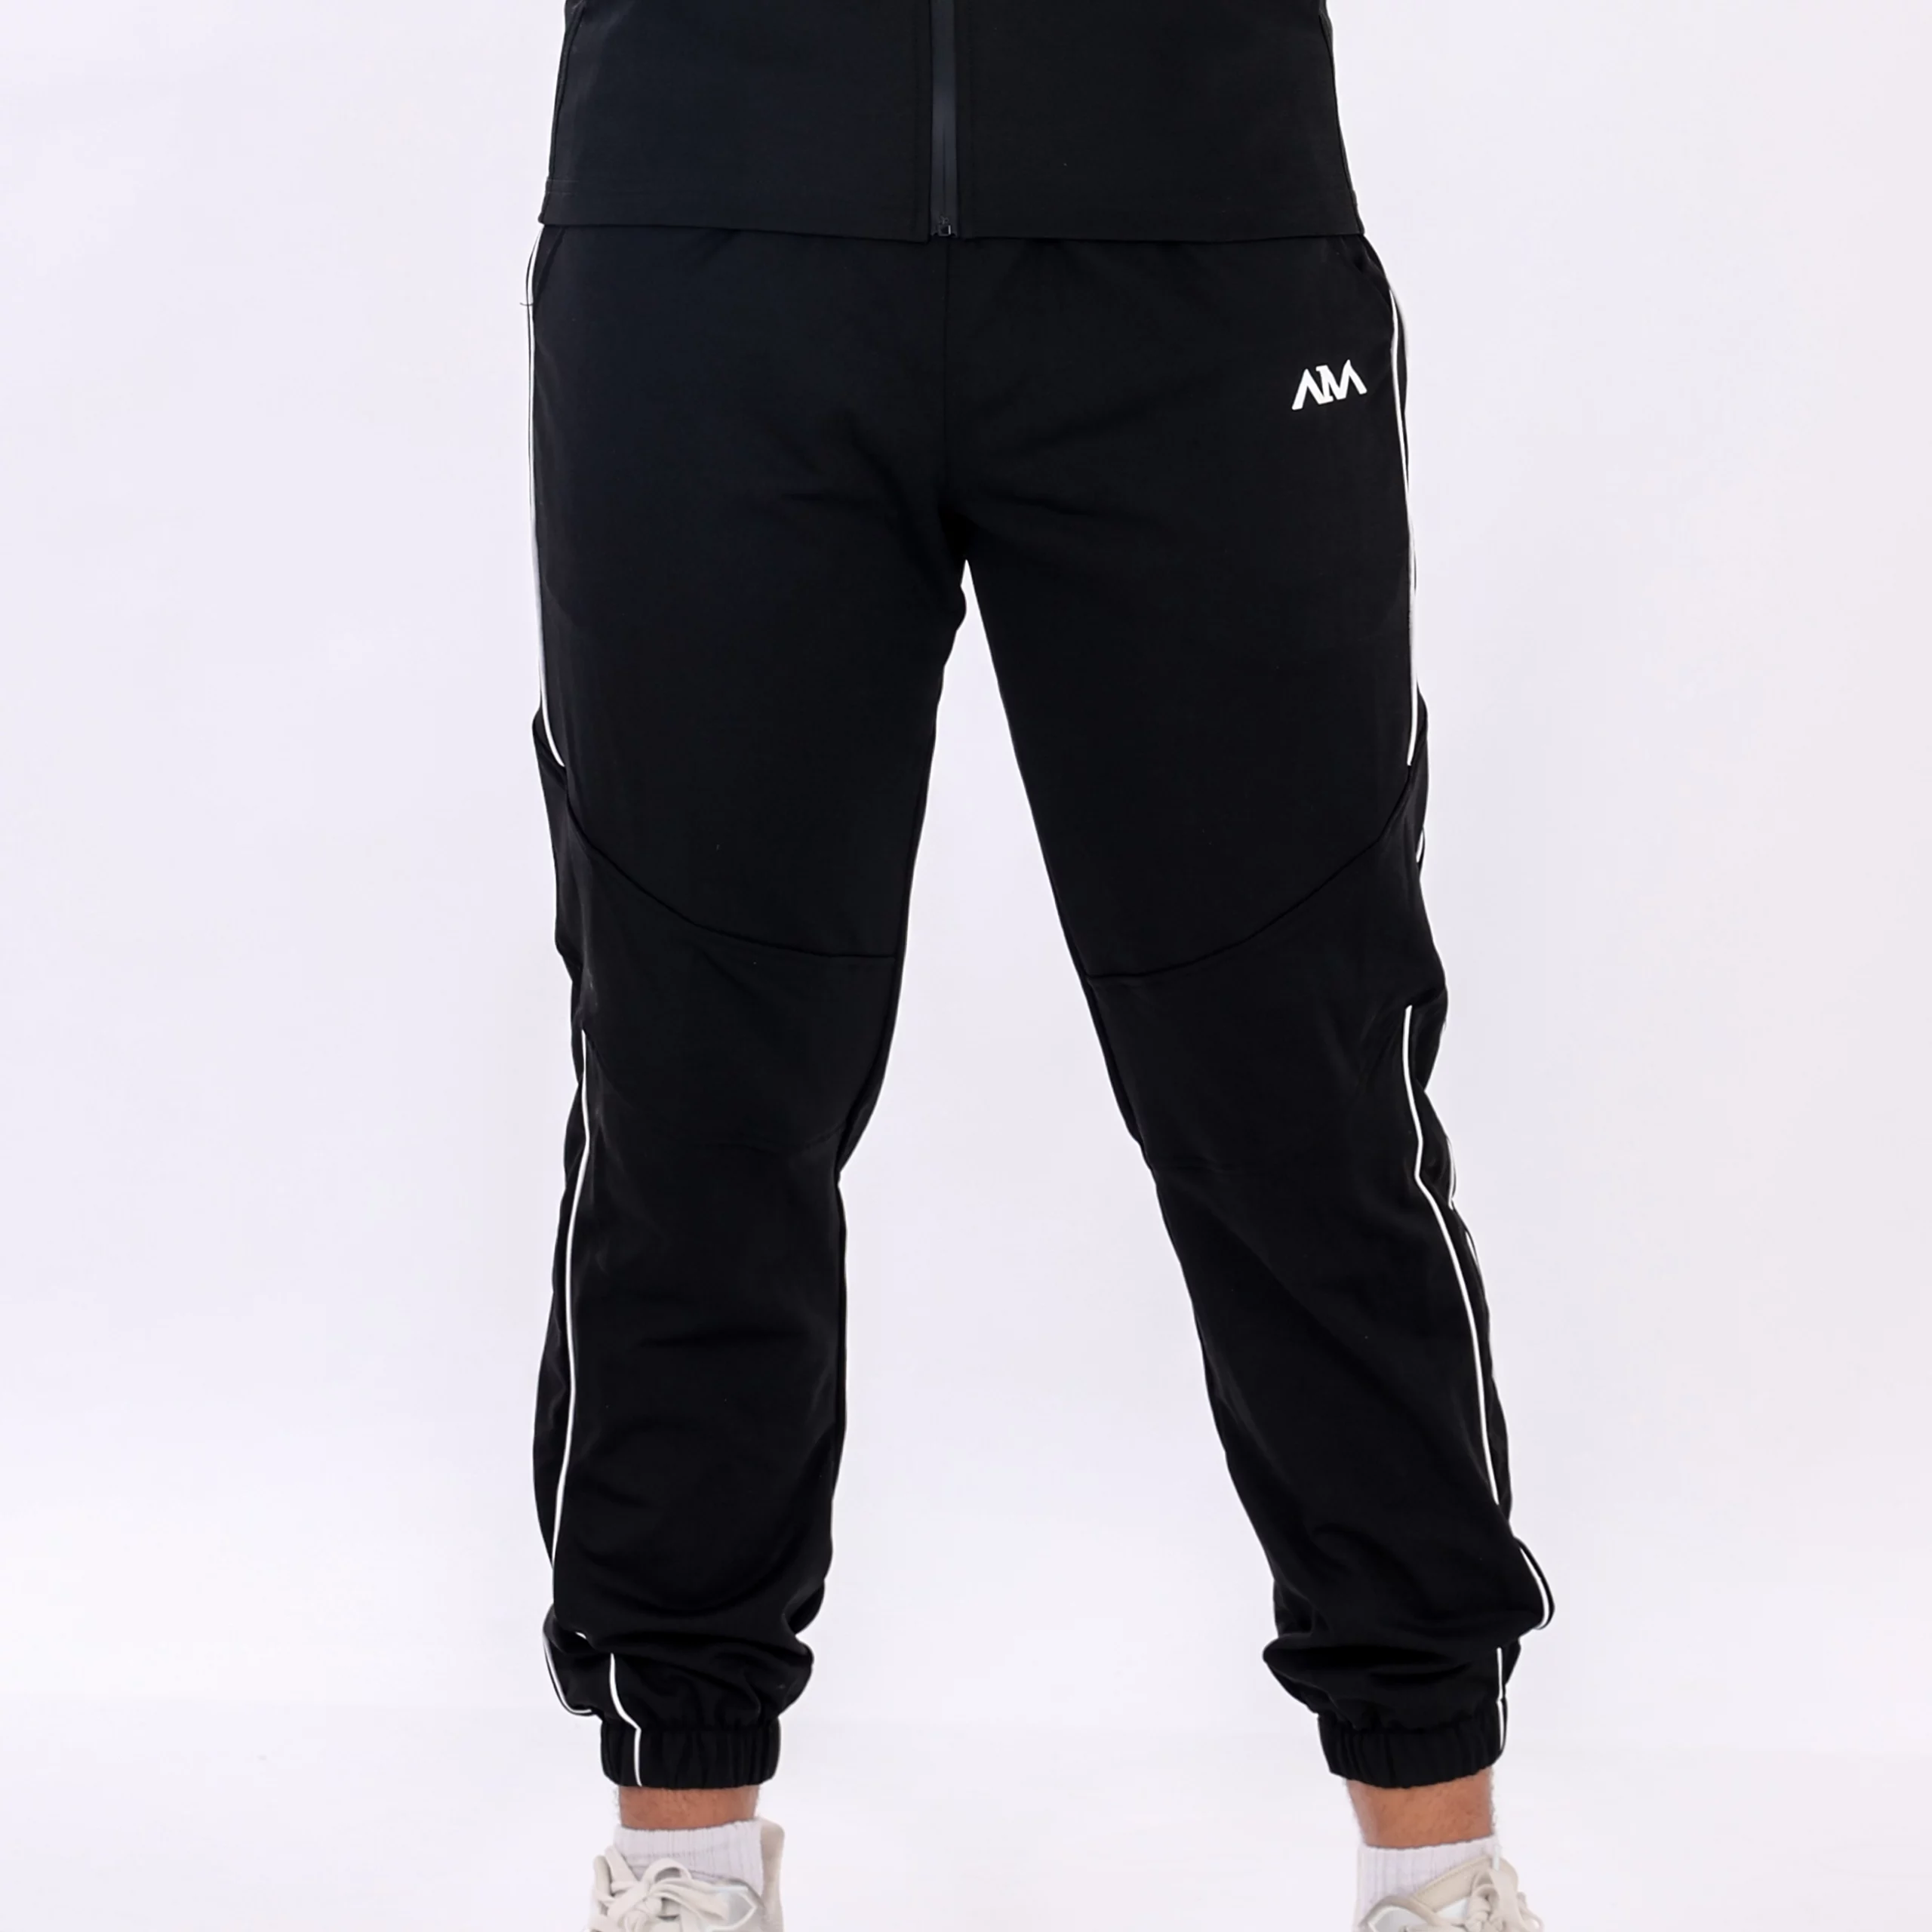 AIM Clothing - High Quality Lebanese Activewear and Sportswear Brand